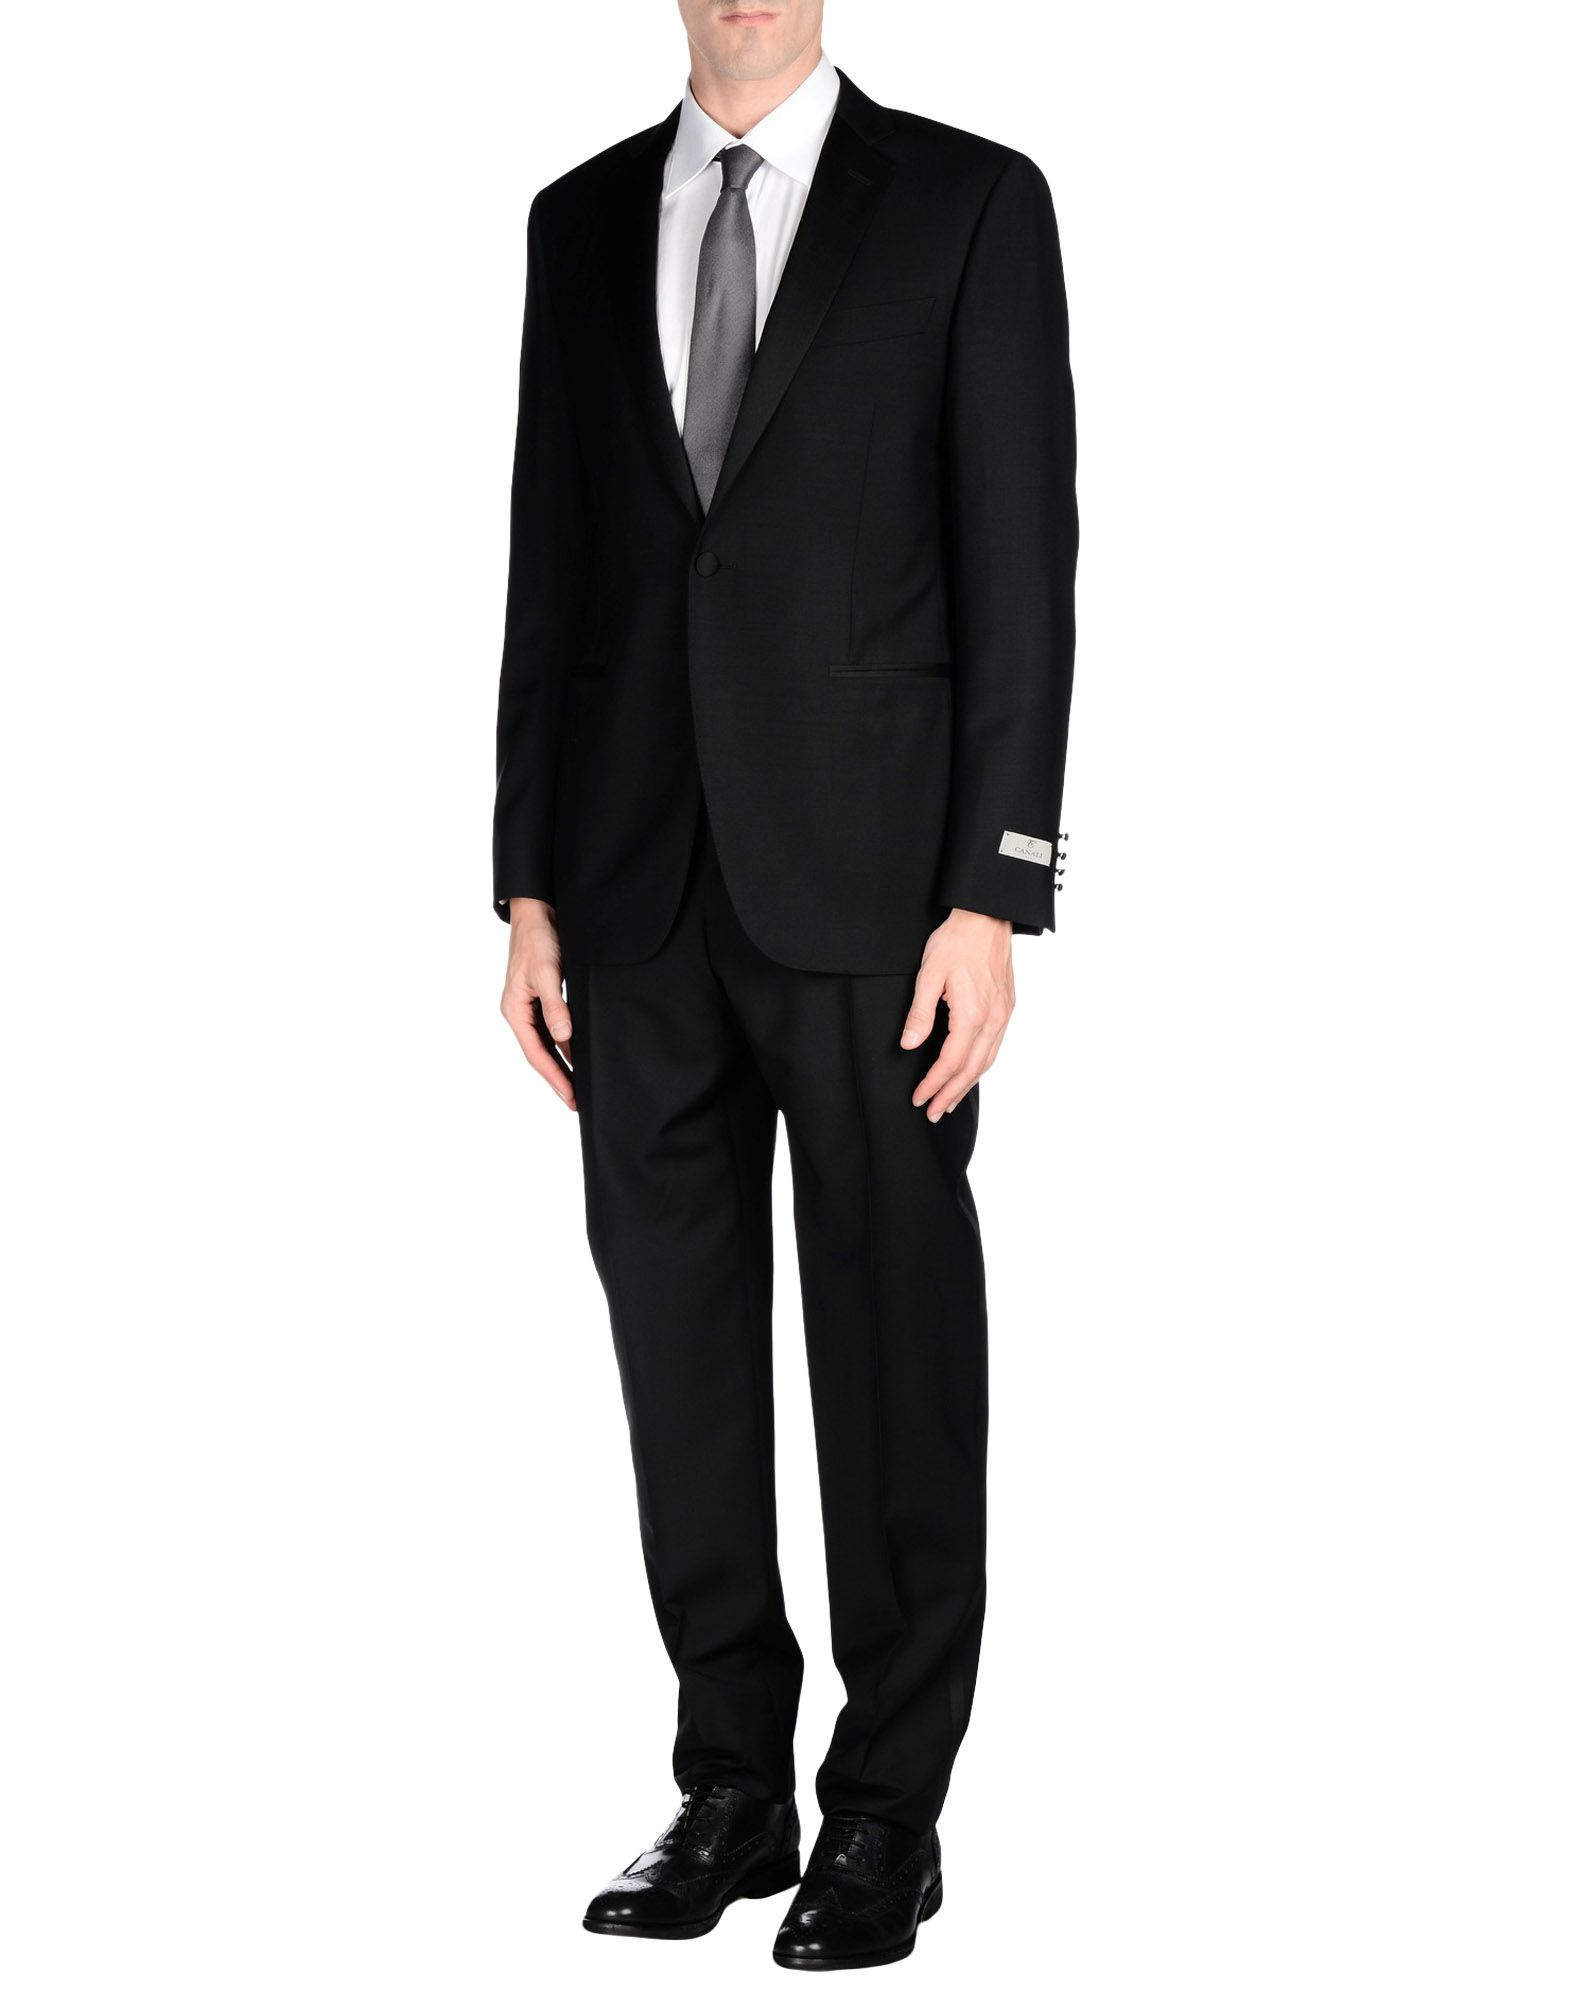 Lyst - Canali Suit in Black for Men